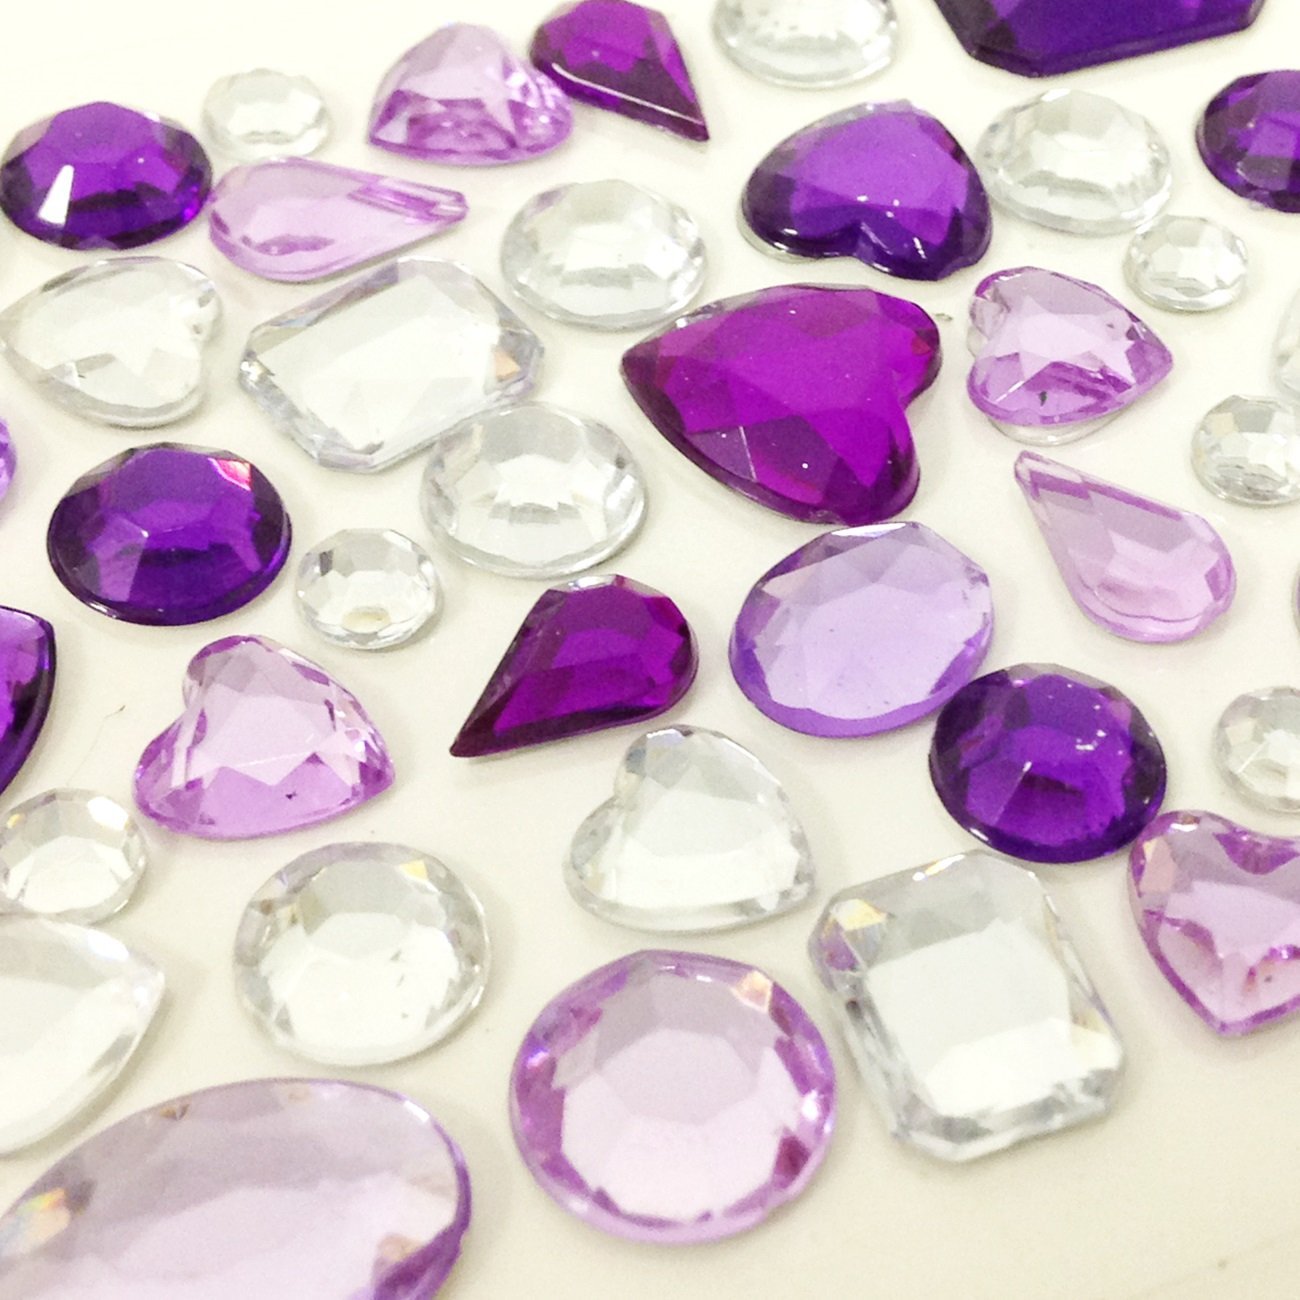 Wrapables 164 Pieces Crystal Heart and Pearl Stickers Adhesive Rhinestones Purple